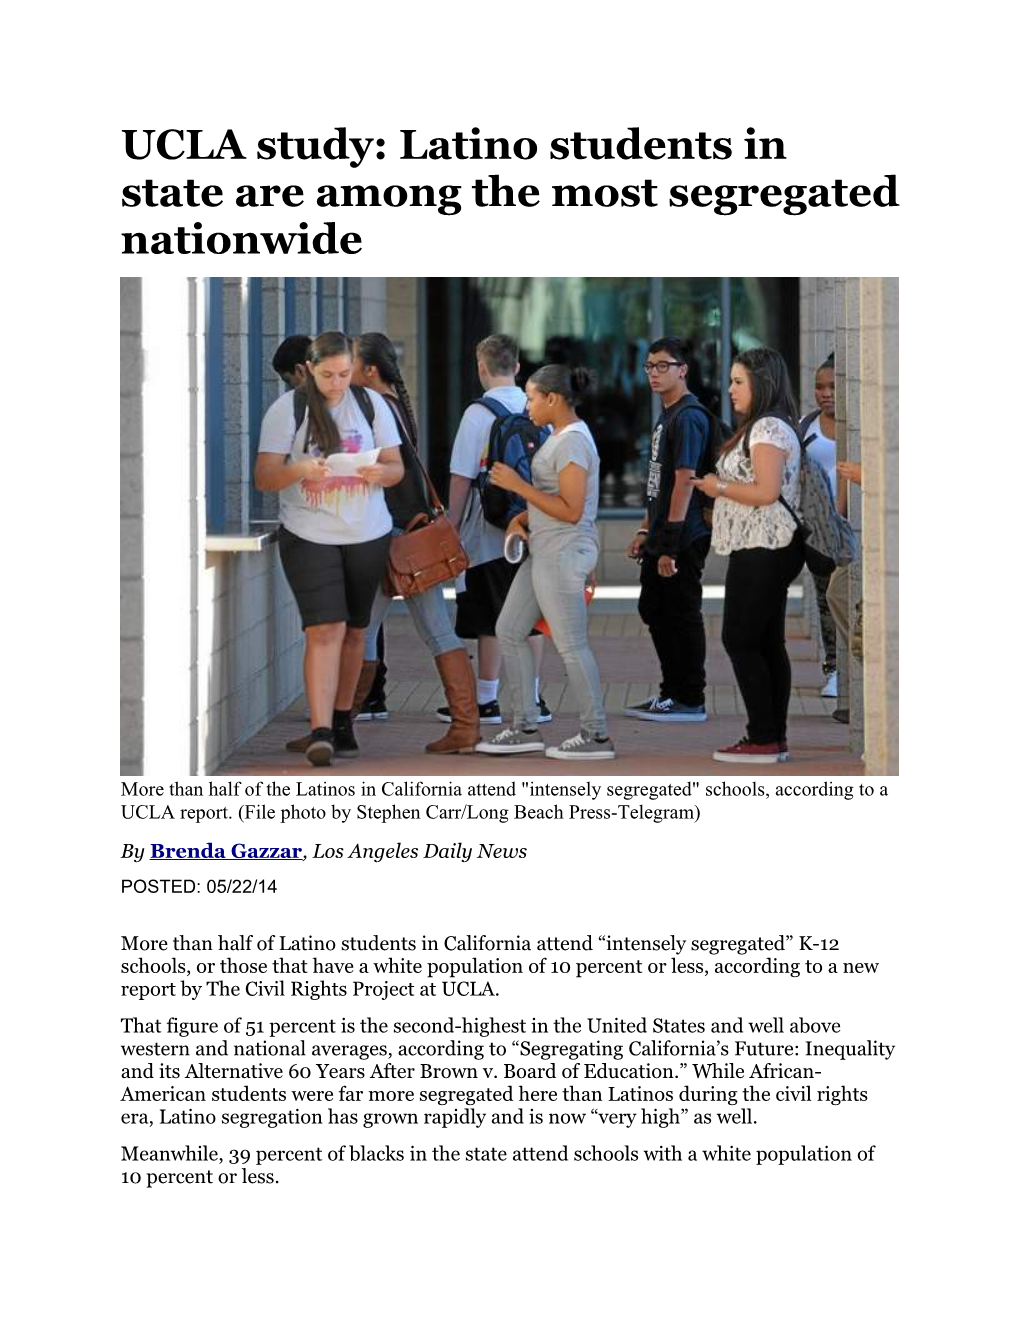 UCLA Study: Latino Students in State Are Among the Most Segregated Nationwide